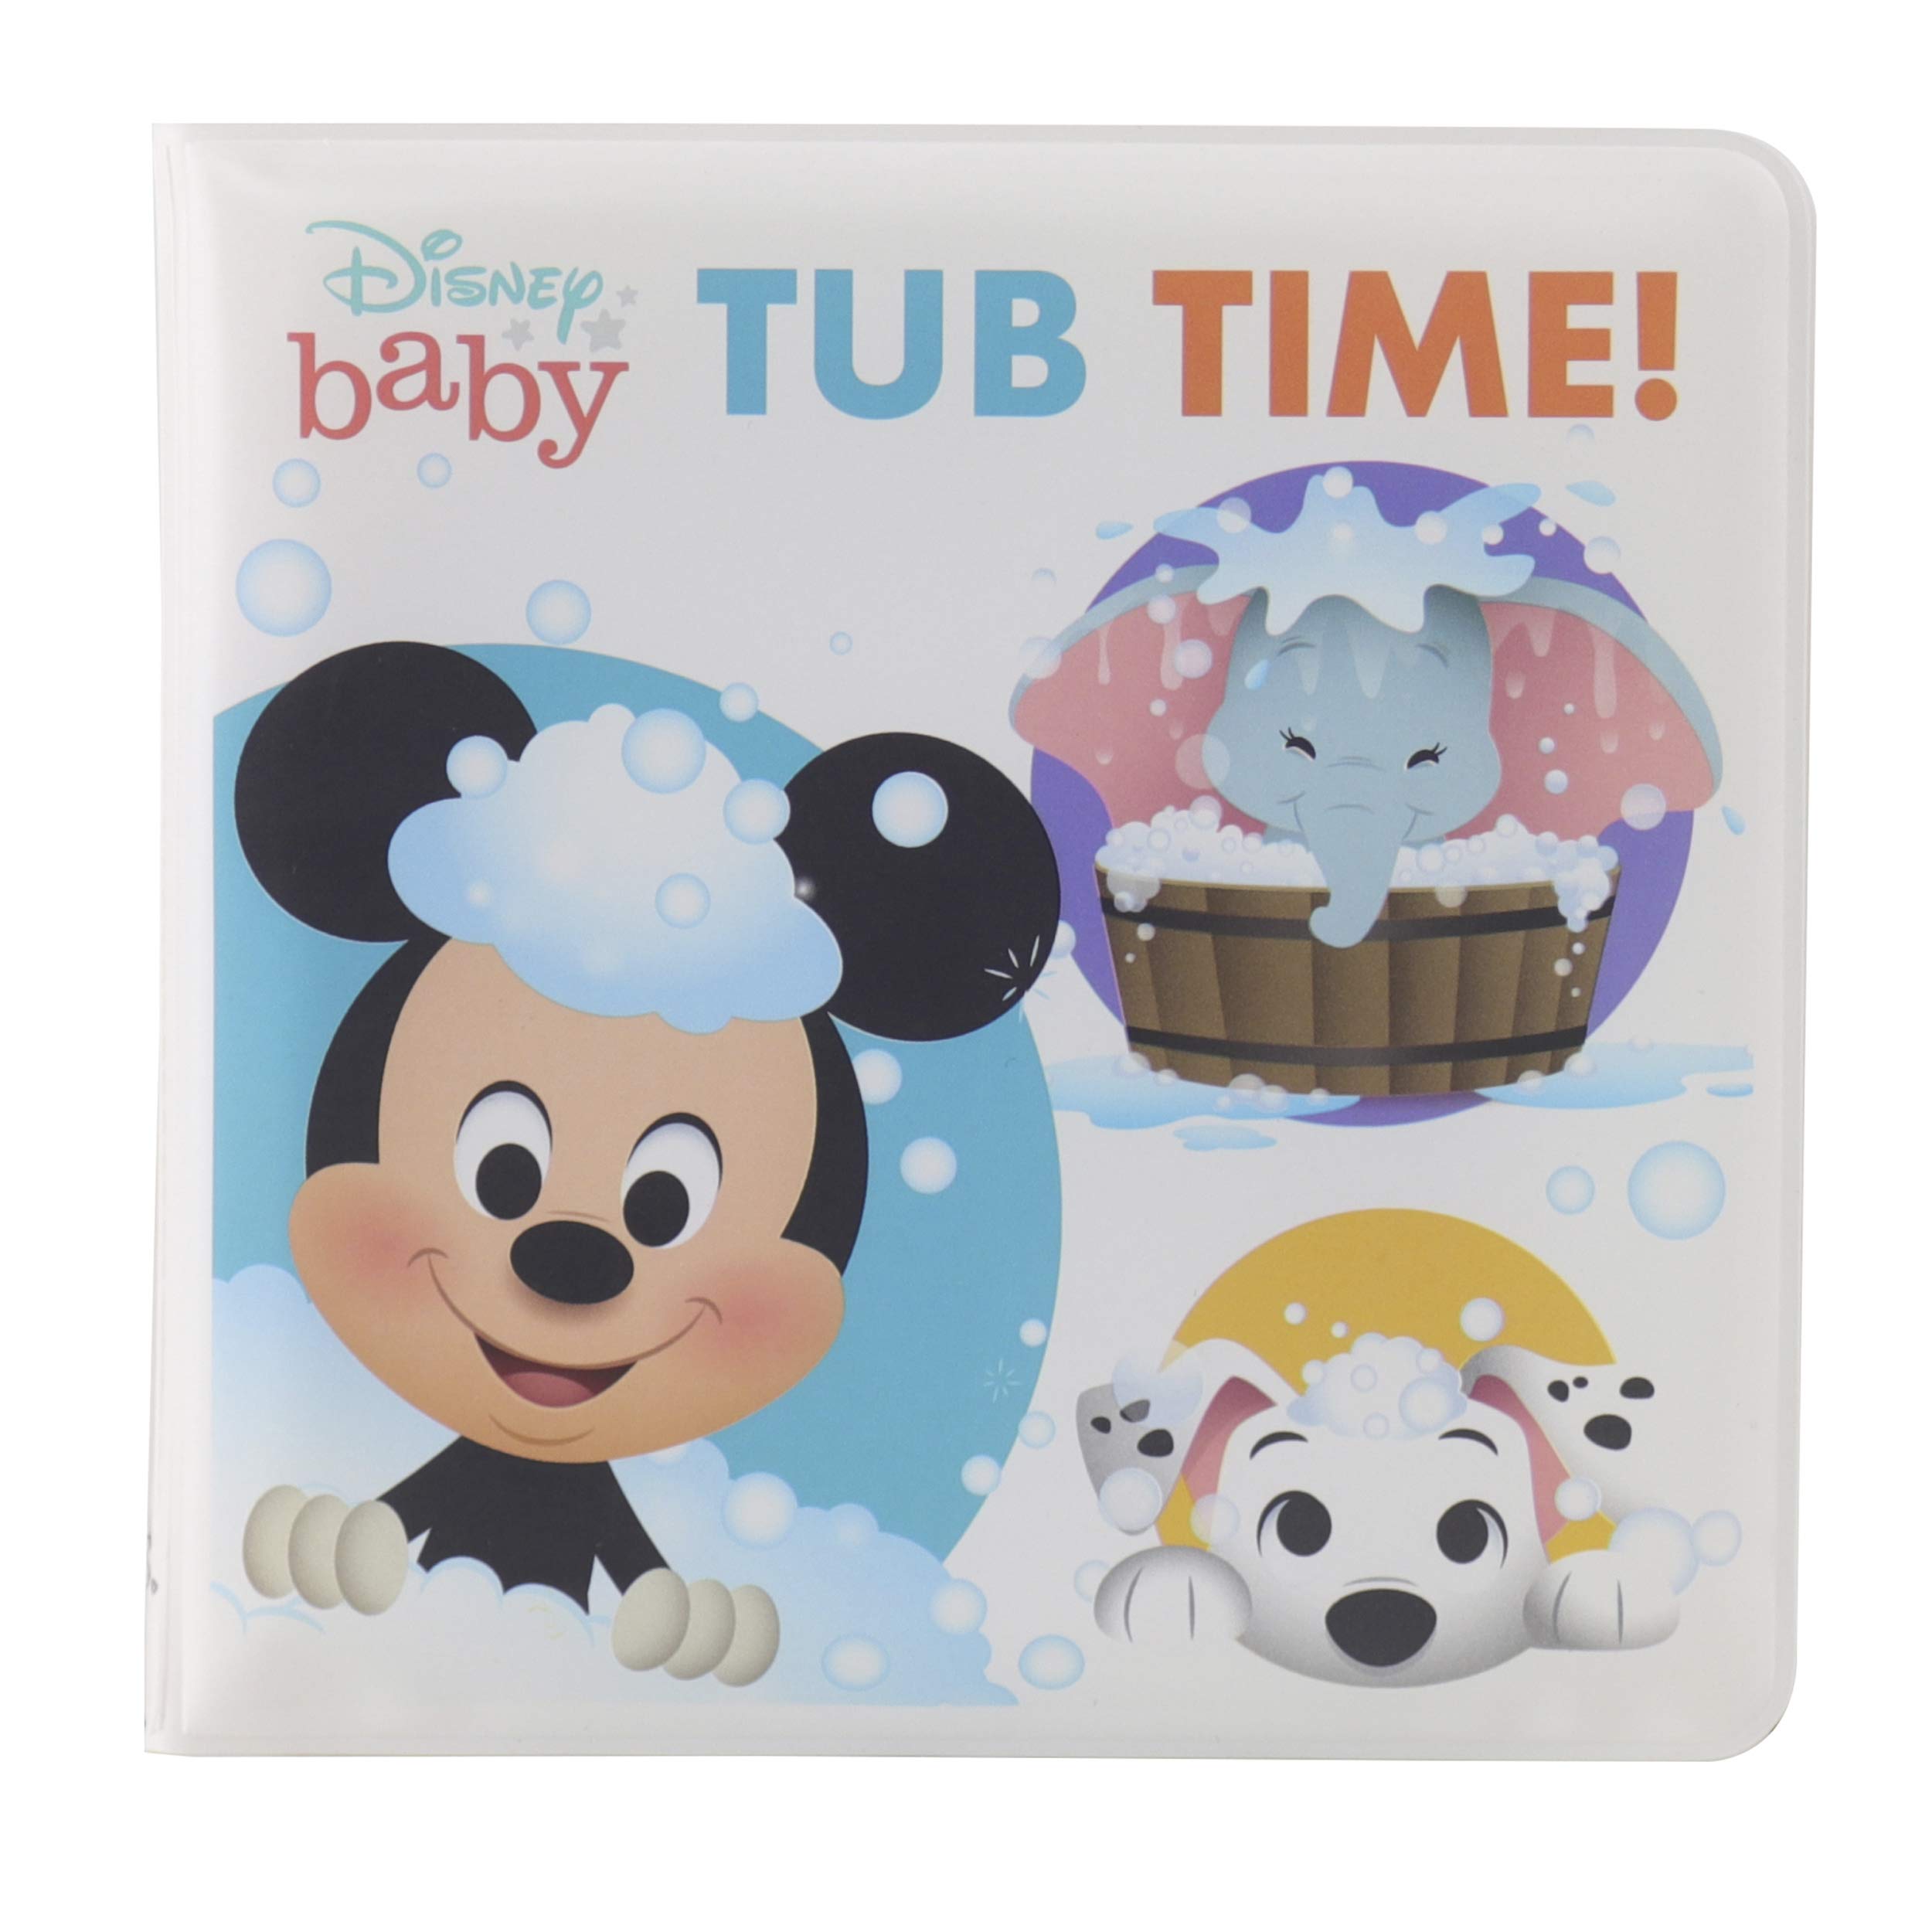 Image of "Baby Bath Time" book cover. 